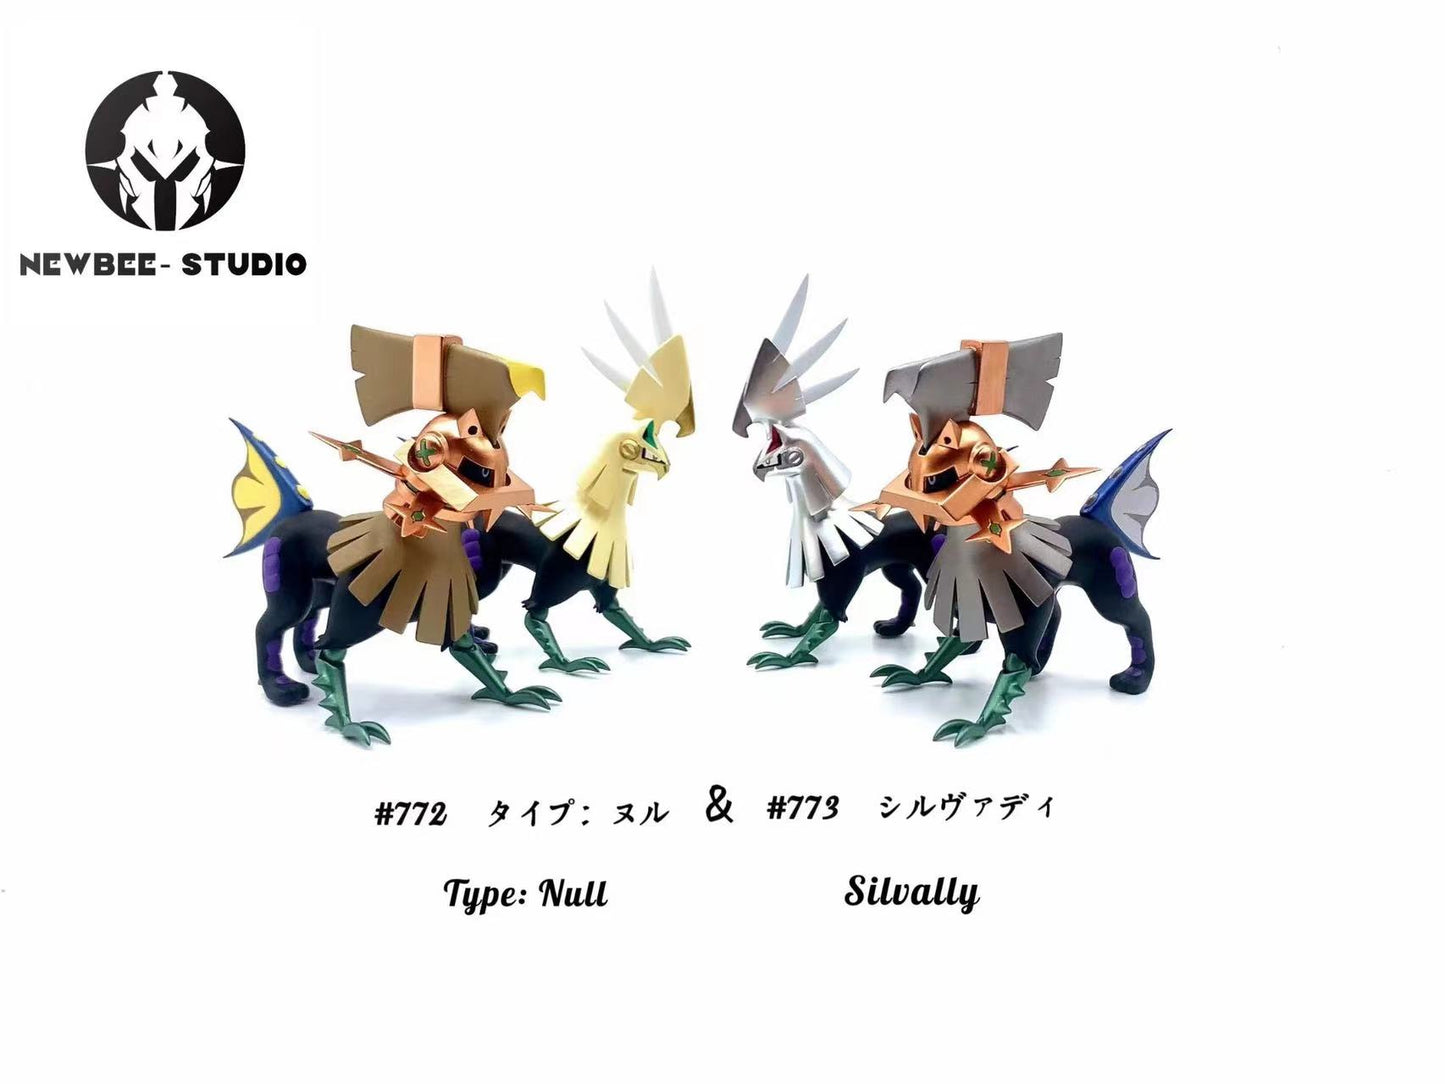 〖Sold Out〗Pokemon Scale World Type: Null Silvally #772 #773 1:20 - Newbee Studio